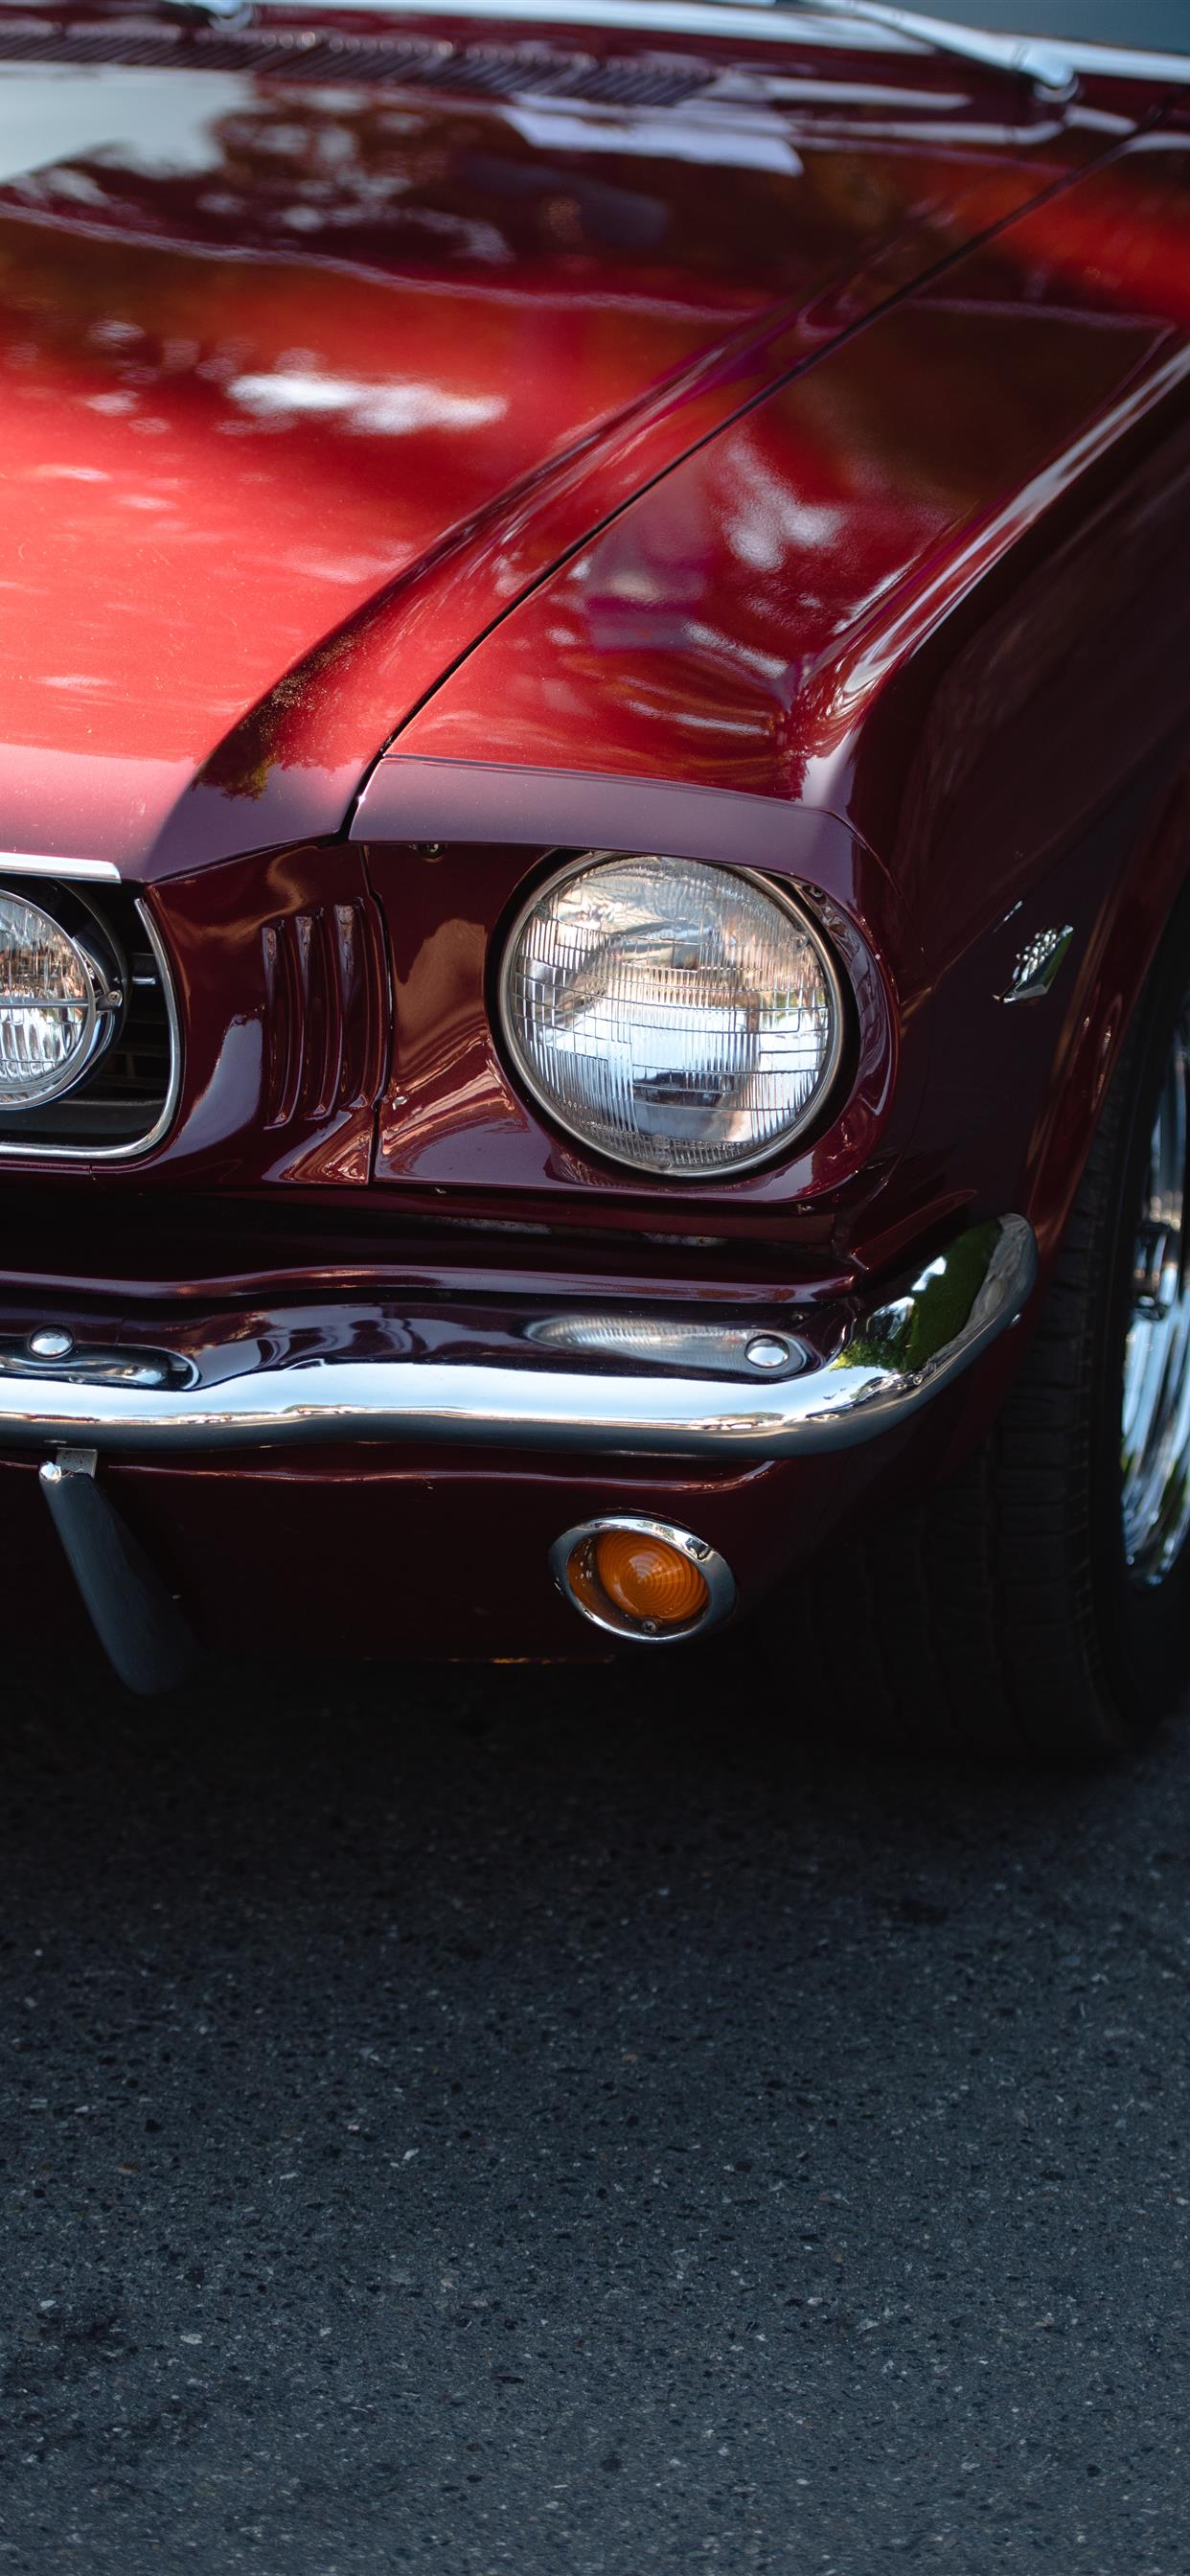 From The Oak Bay Car Show iPhone X Wallpaper